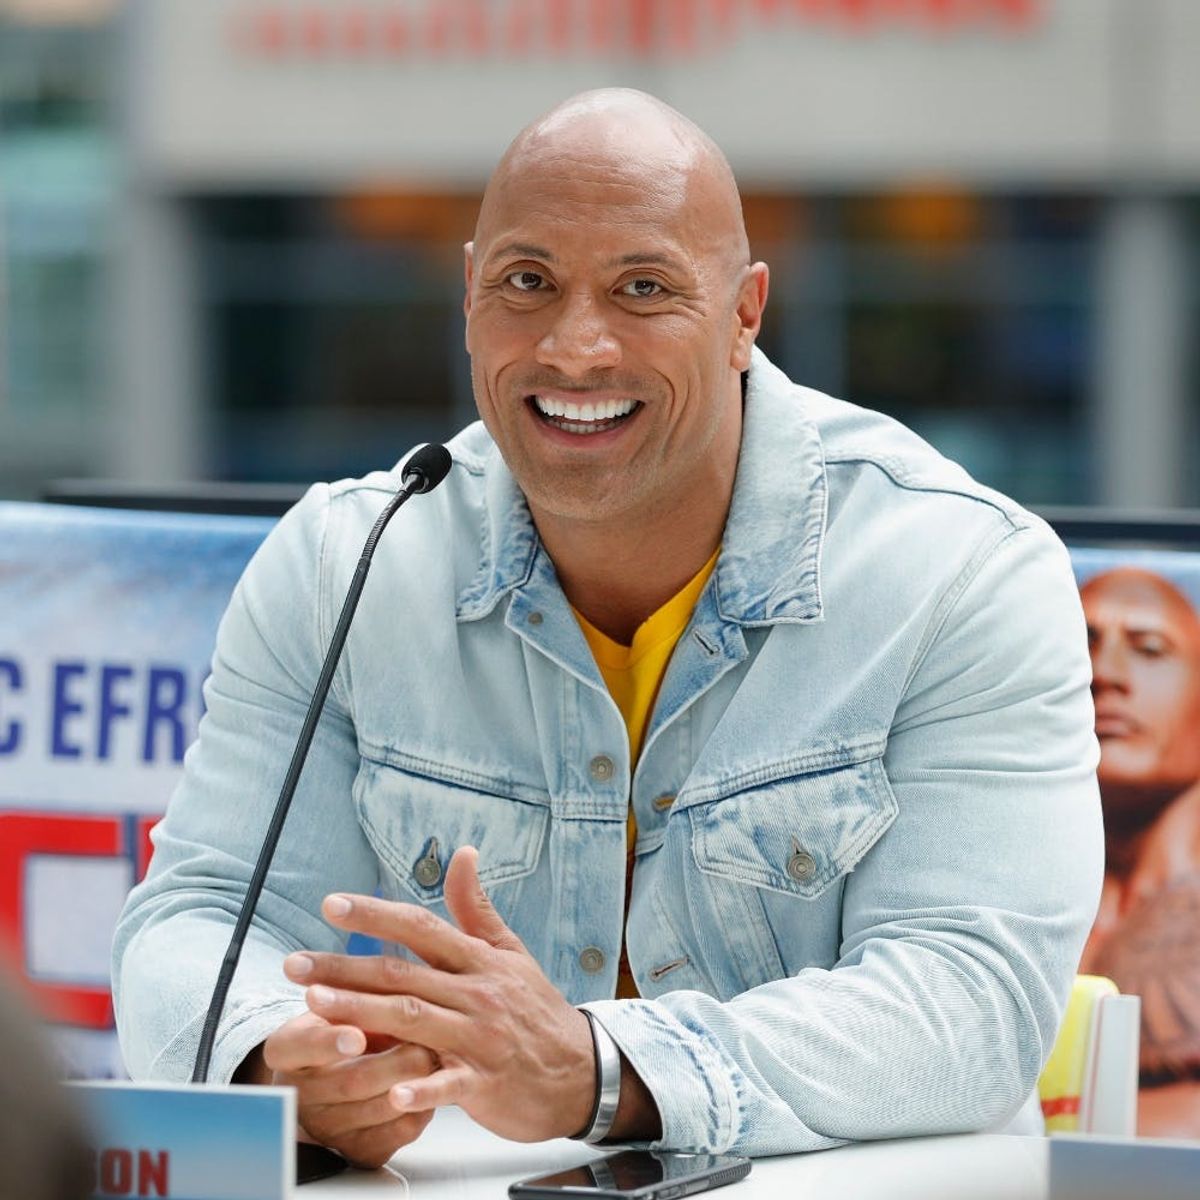 The “Run The Rock 2020” Committee Seriously Wants Dwayne “The Rock” Johnson to Run for President